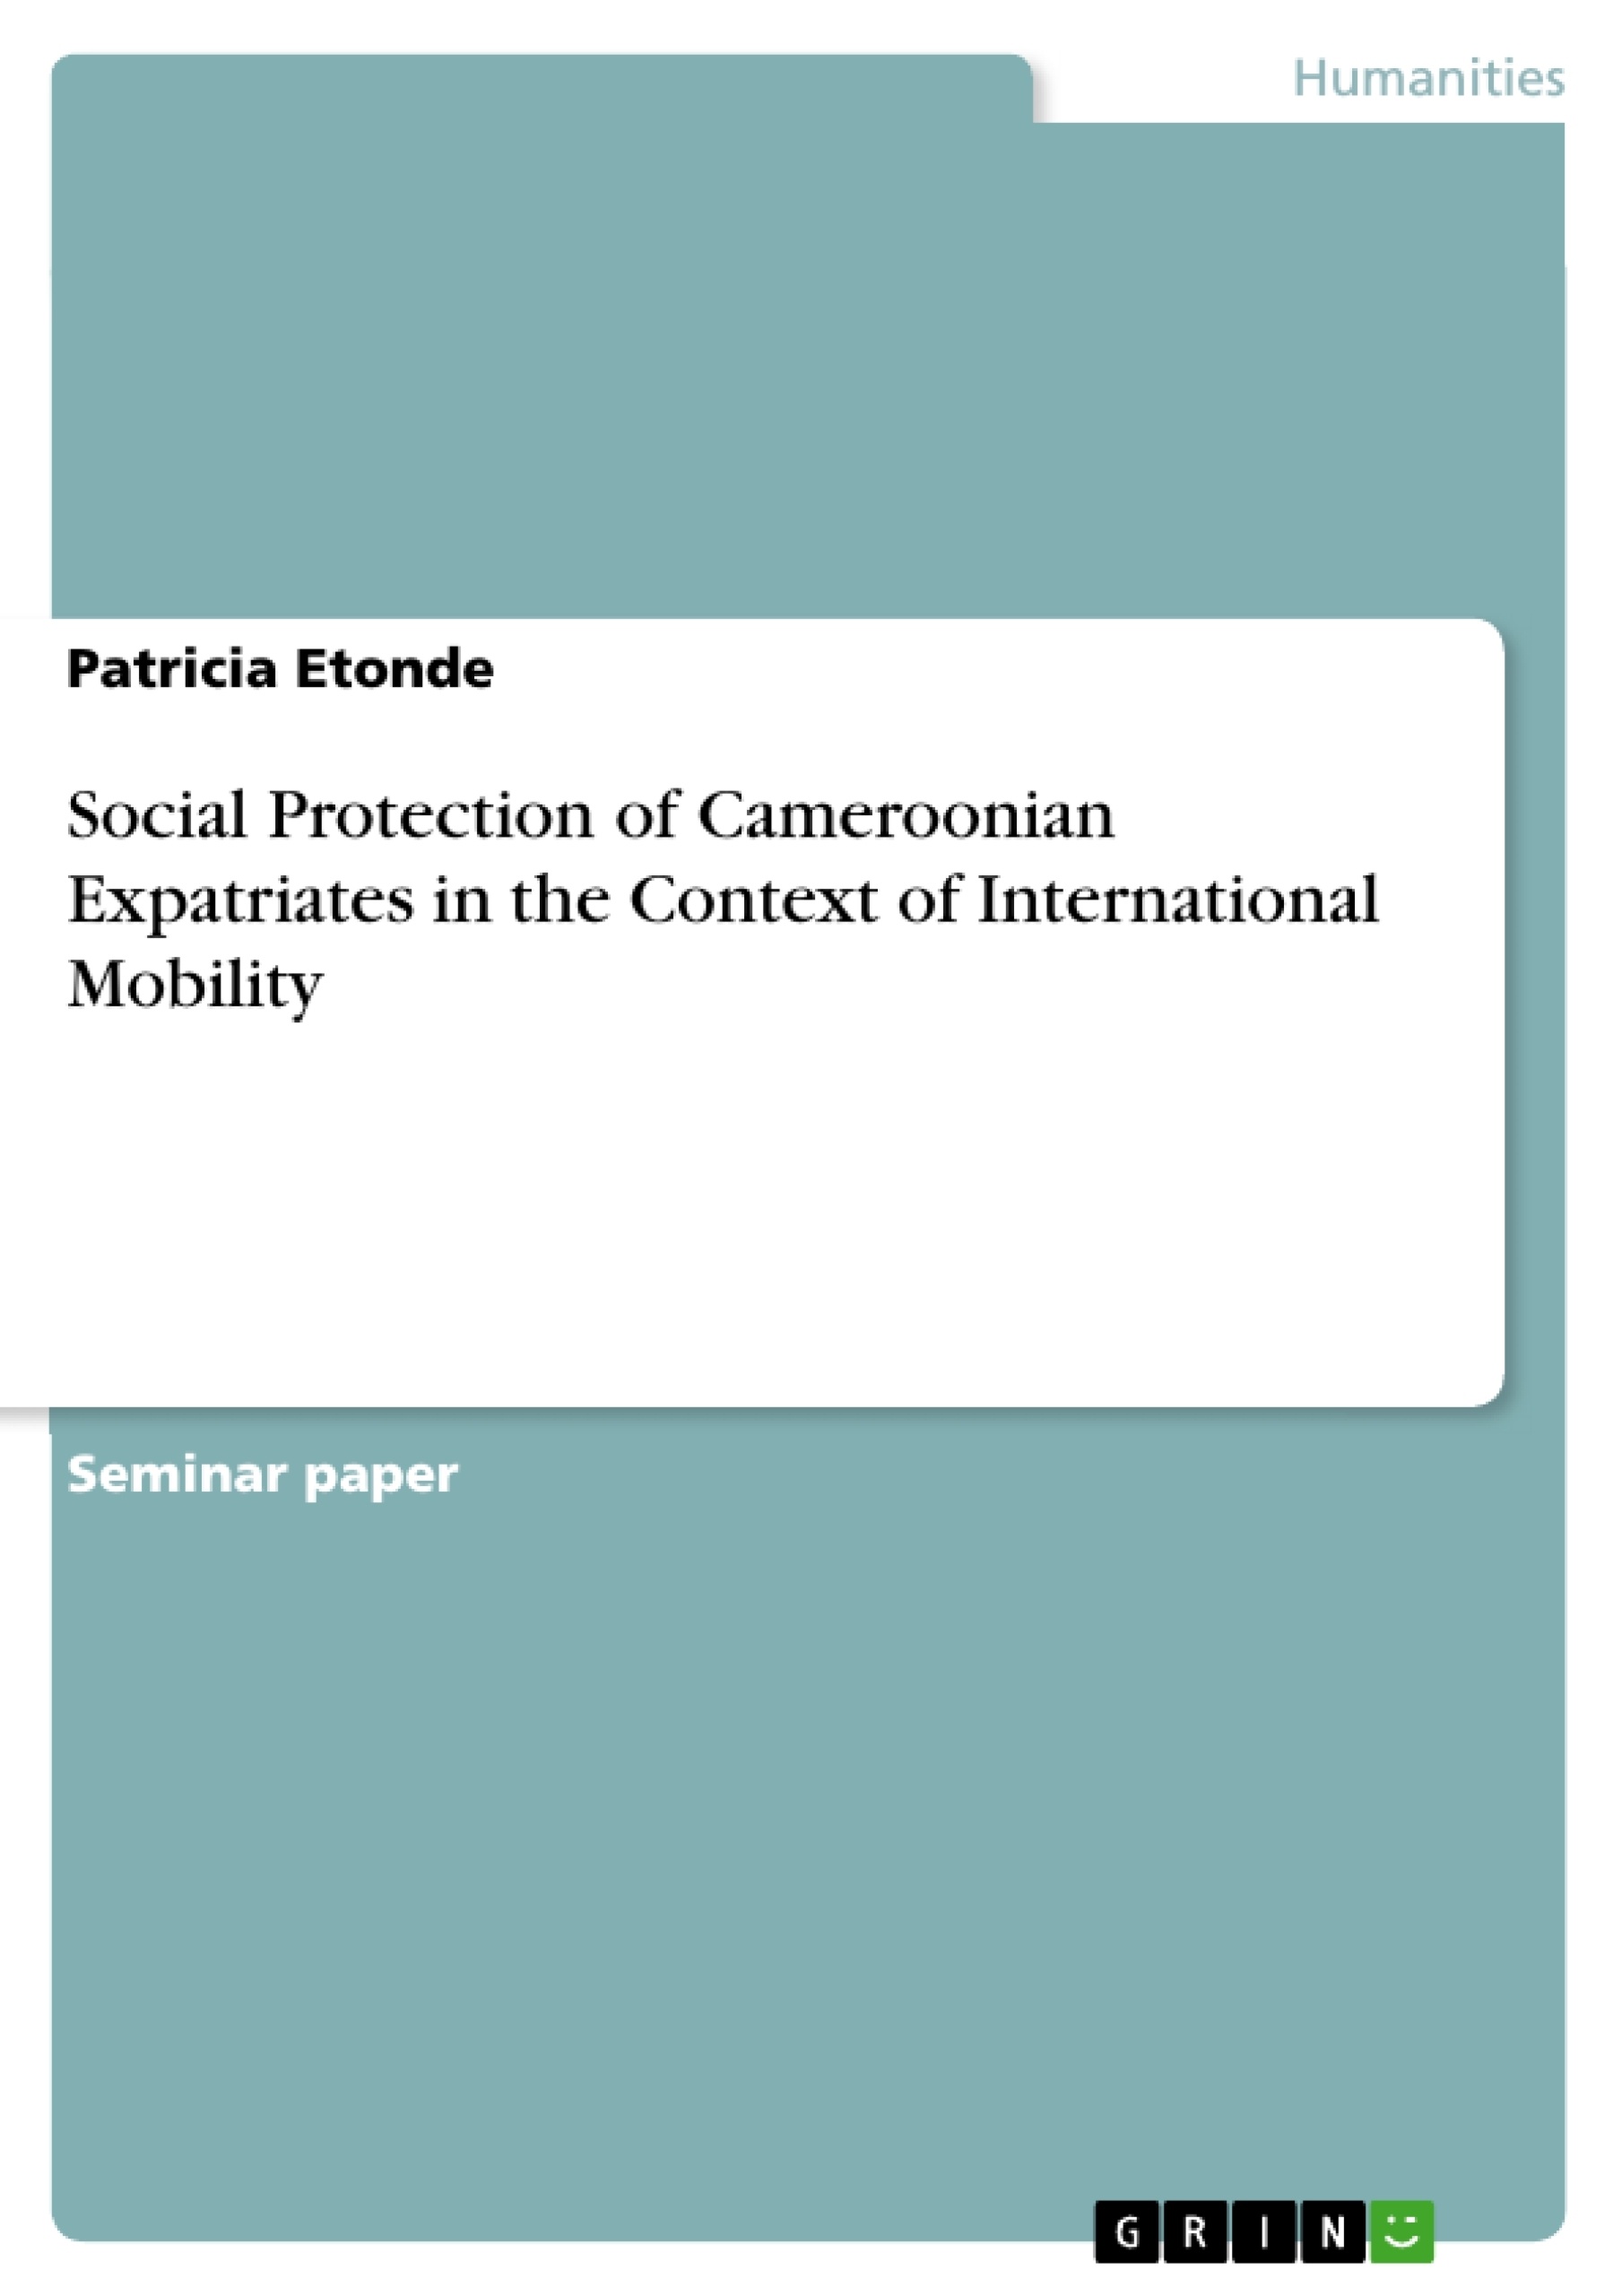 Title: Social Protection of Cameroonian Expatriates in the Context of International Mobility